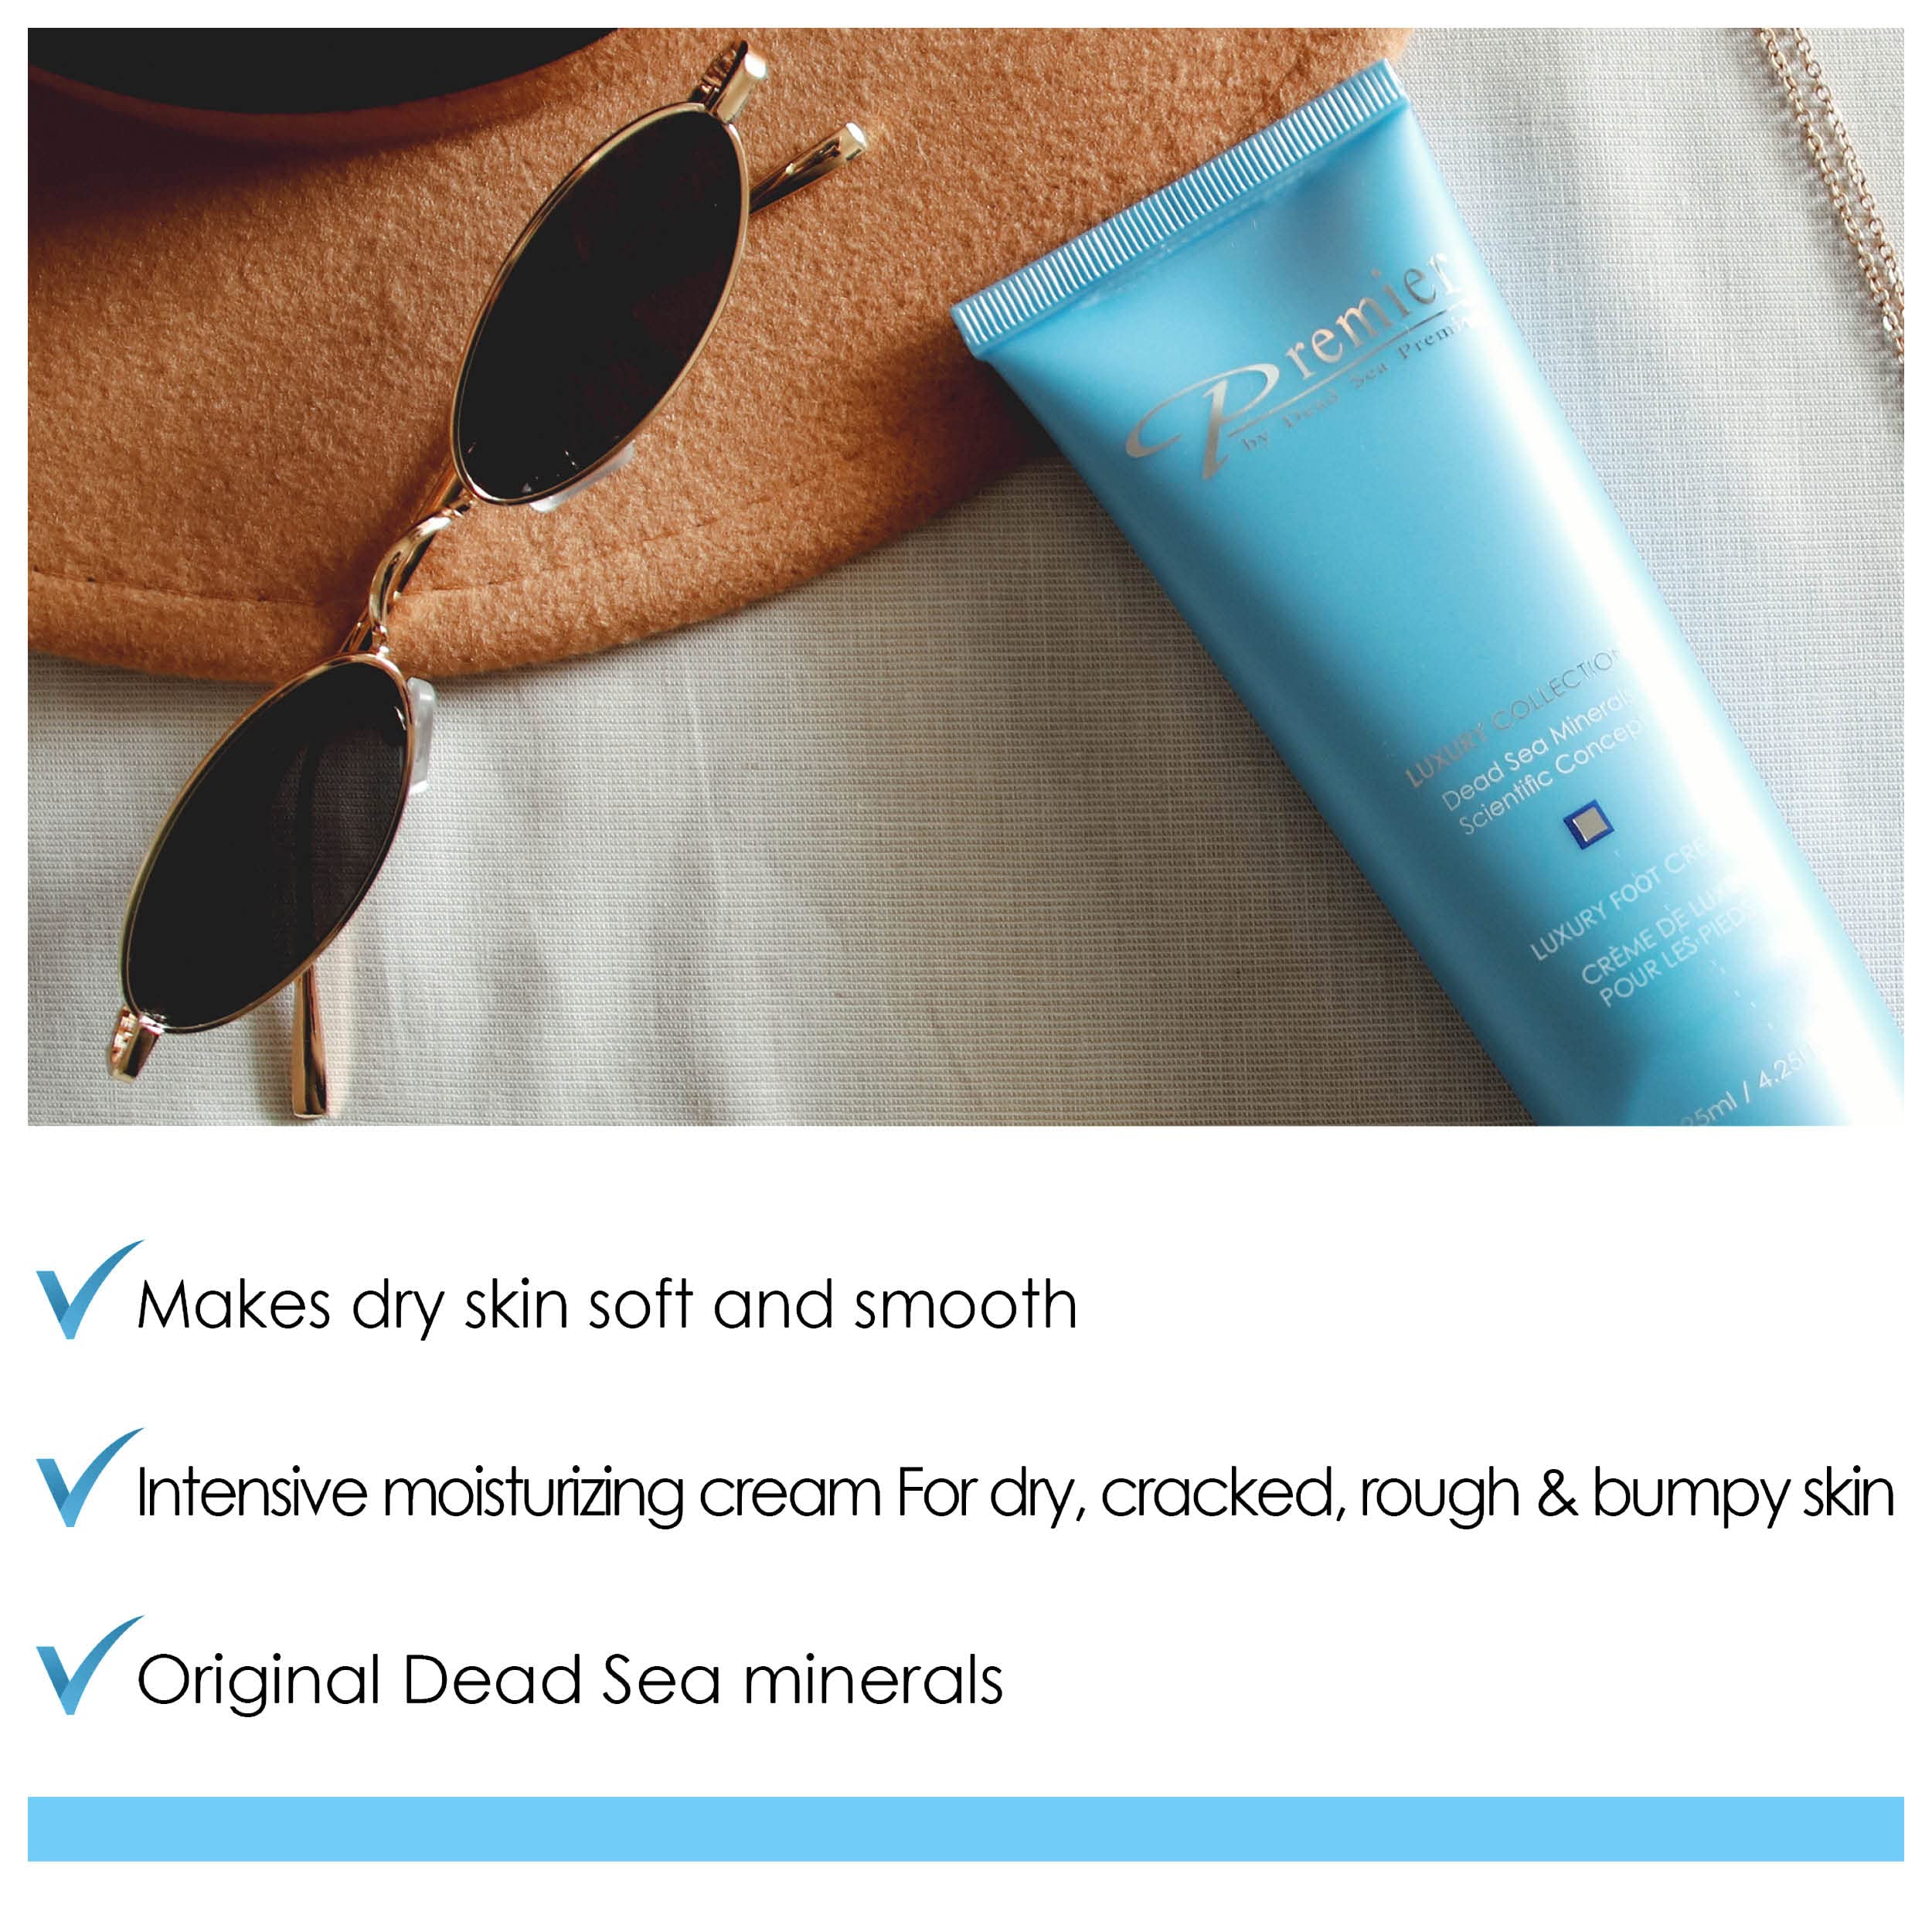 Premier Dead Sea Luxury Foot Cream treatment for dry cracked Skin, Smooth and Soften Dry, rough, Cracked Itchy Skin for Healthy Feet, light and quick absorbing. 4.2 fl.oz Product ID: 885525847541